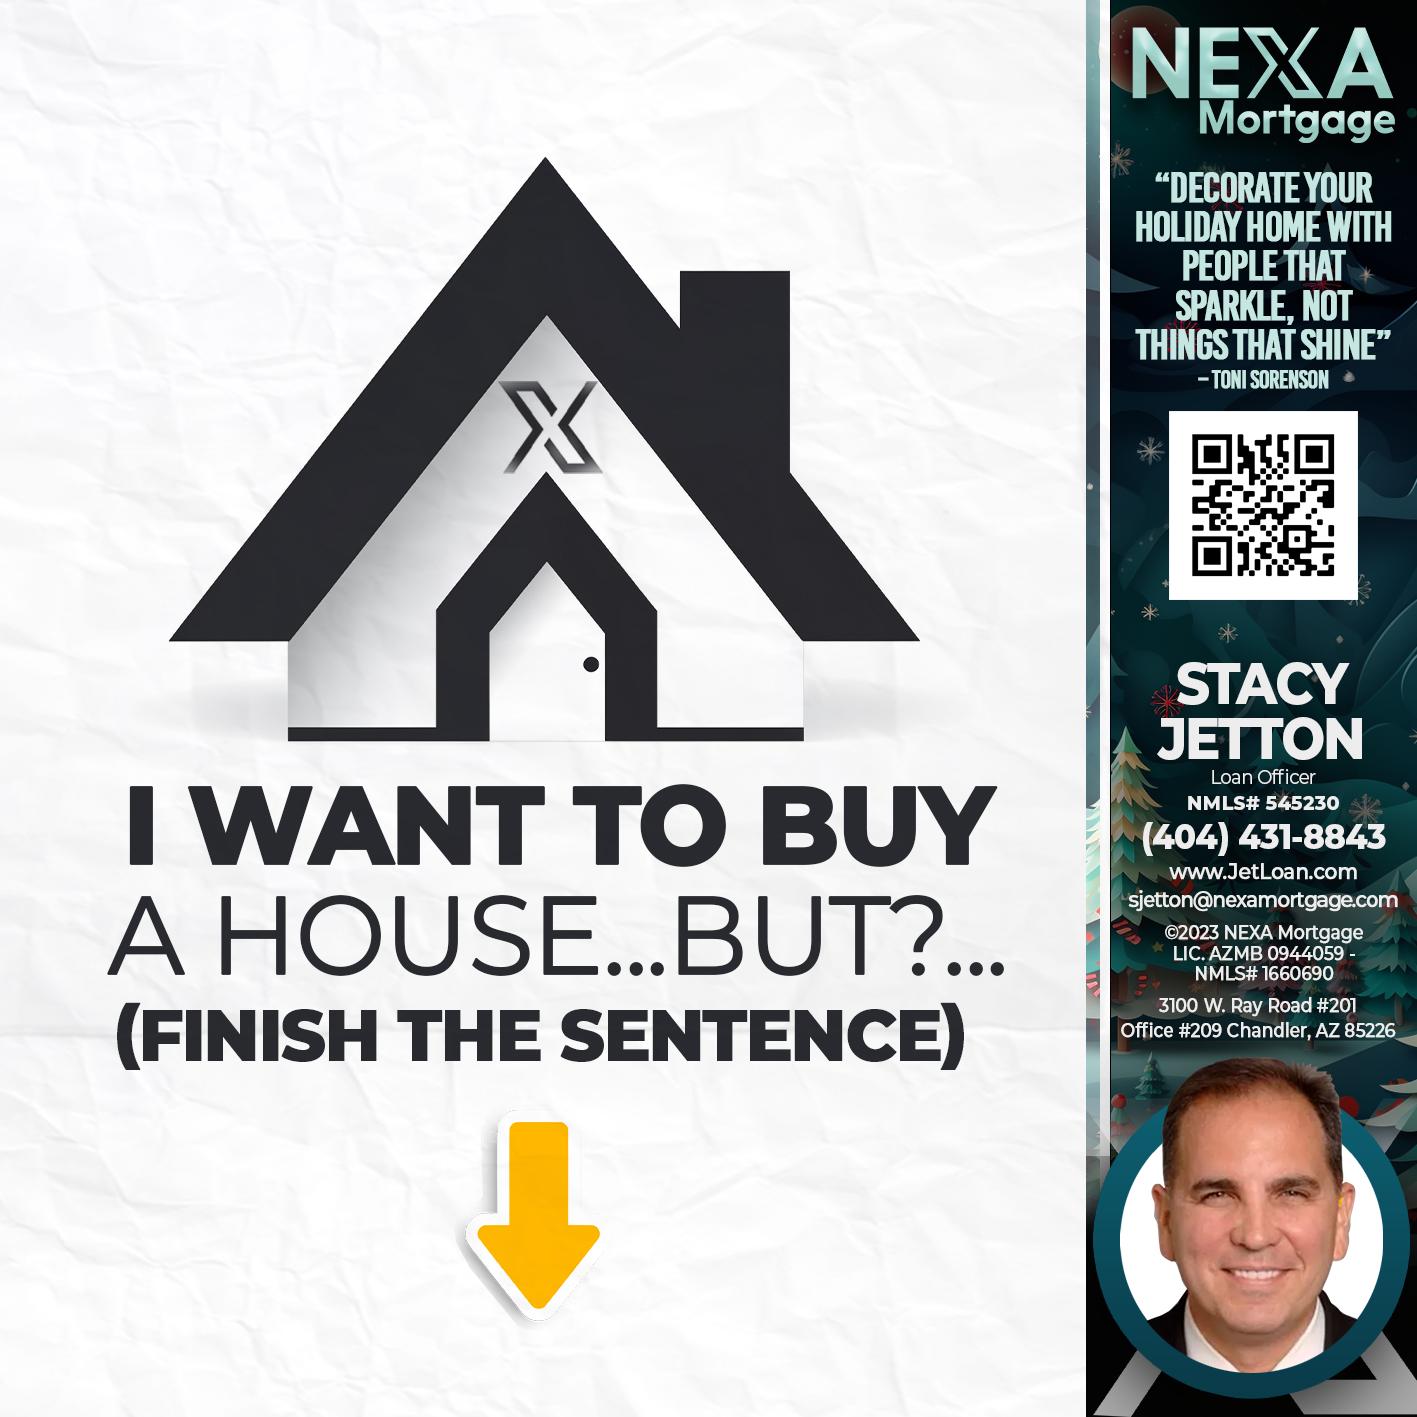 buy a house? - Stacy Jetton -Sr. Mortgage Broker